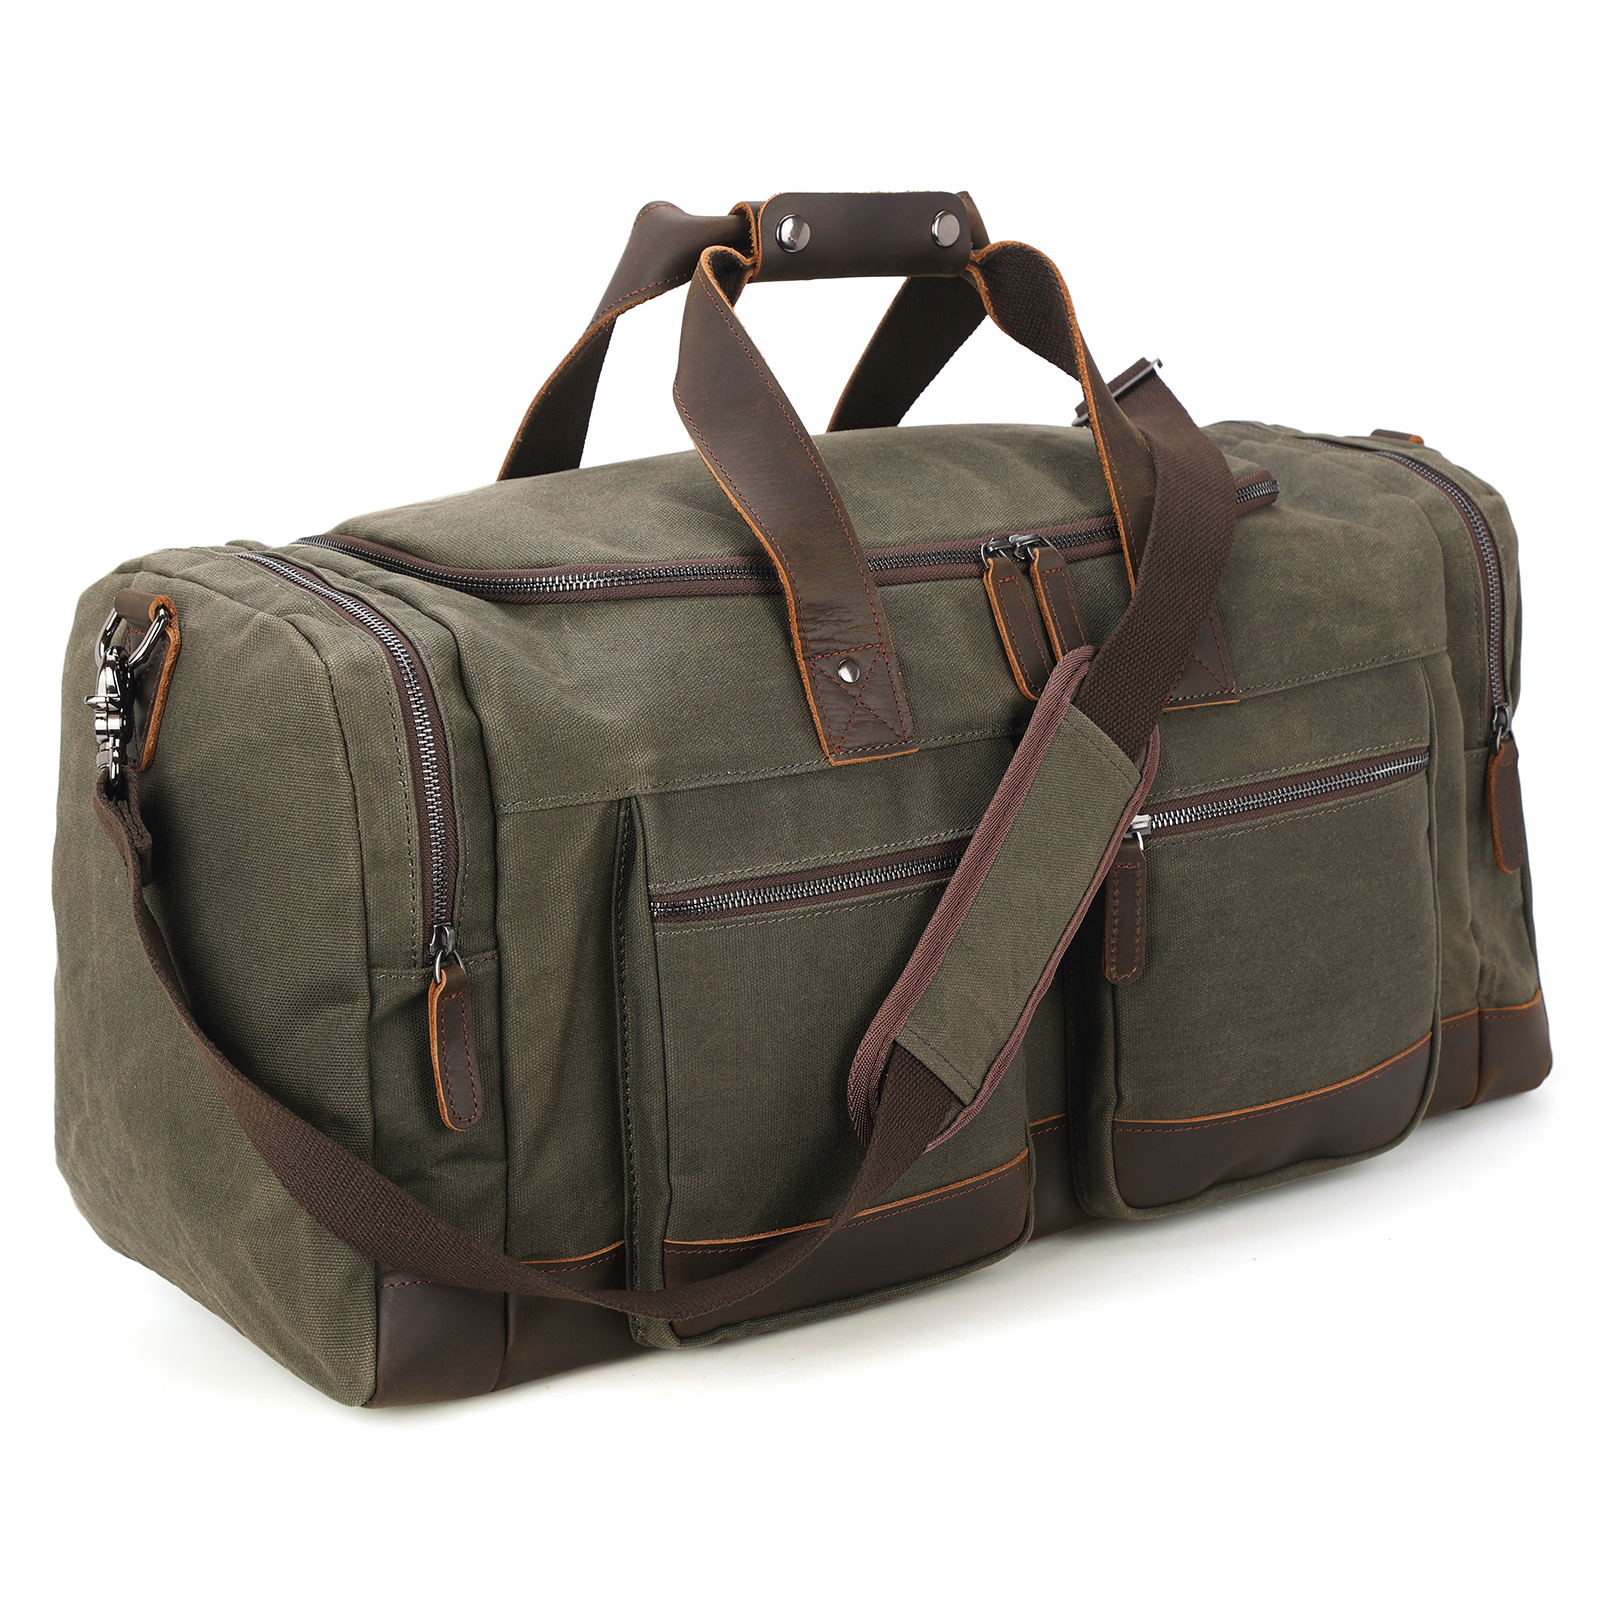 Polare 23” Waxed Canvas Cowhide Leather Travel Duffel Carry on Bag (Army Green)